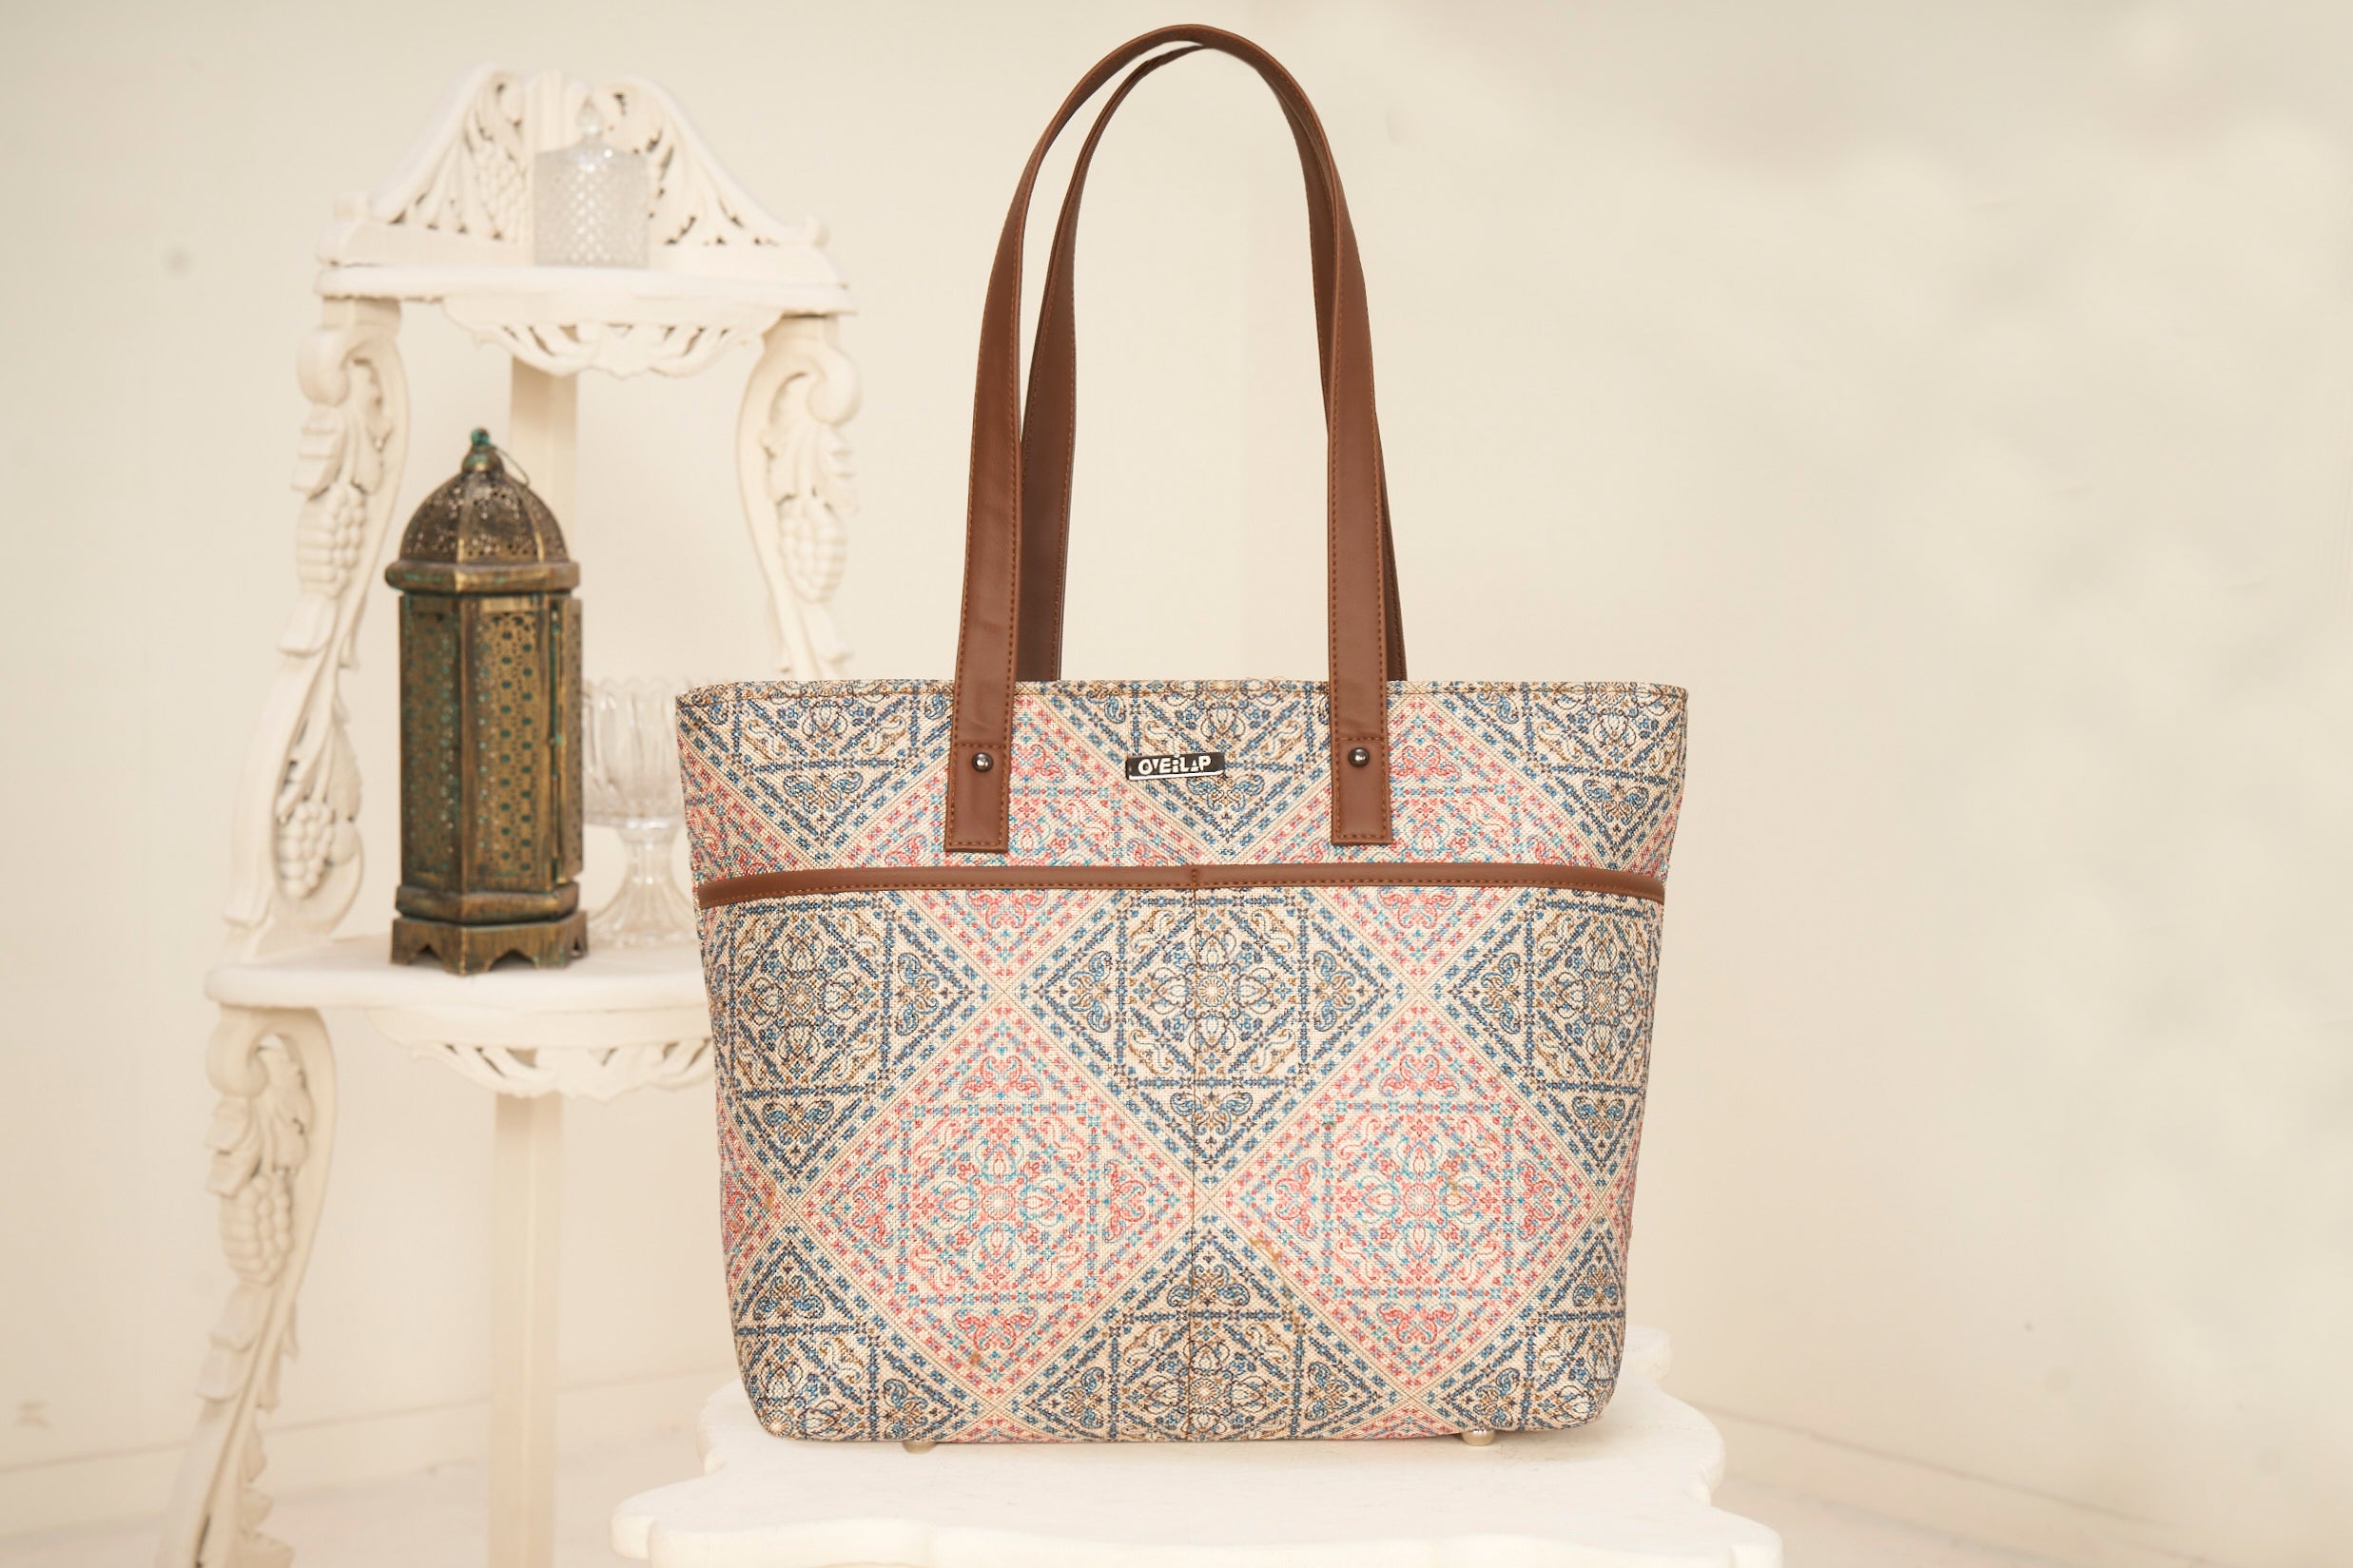 Citron 001: Versatile Charm - Printed Canvas Tote for Every Adventure